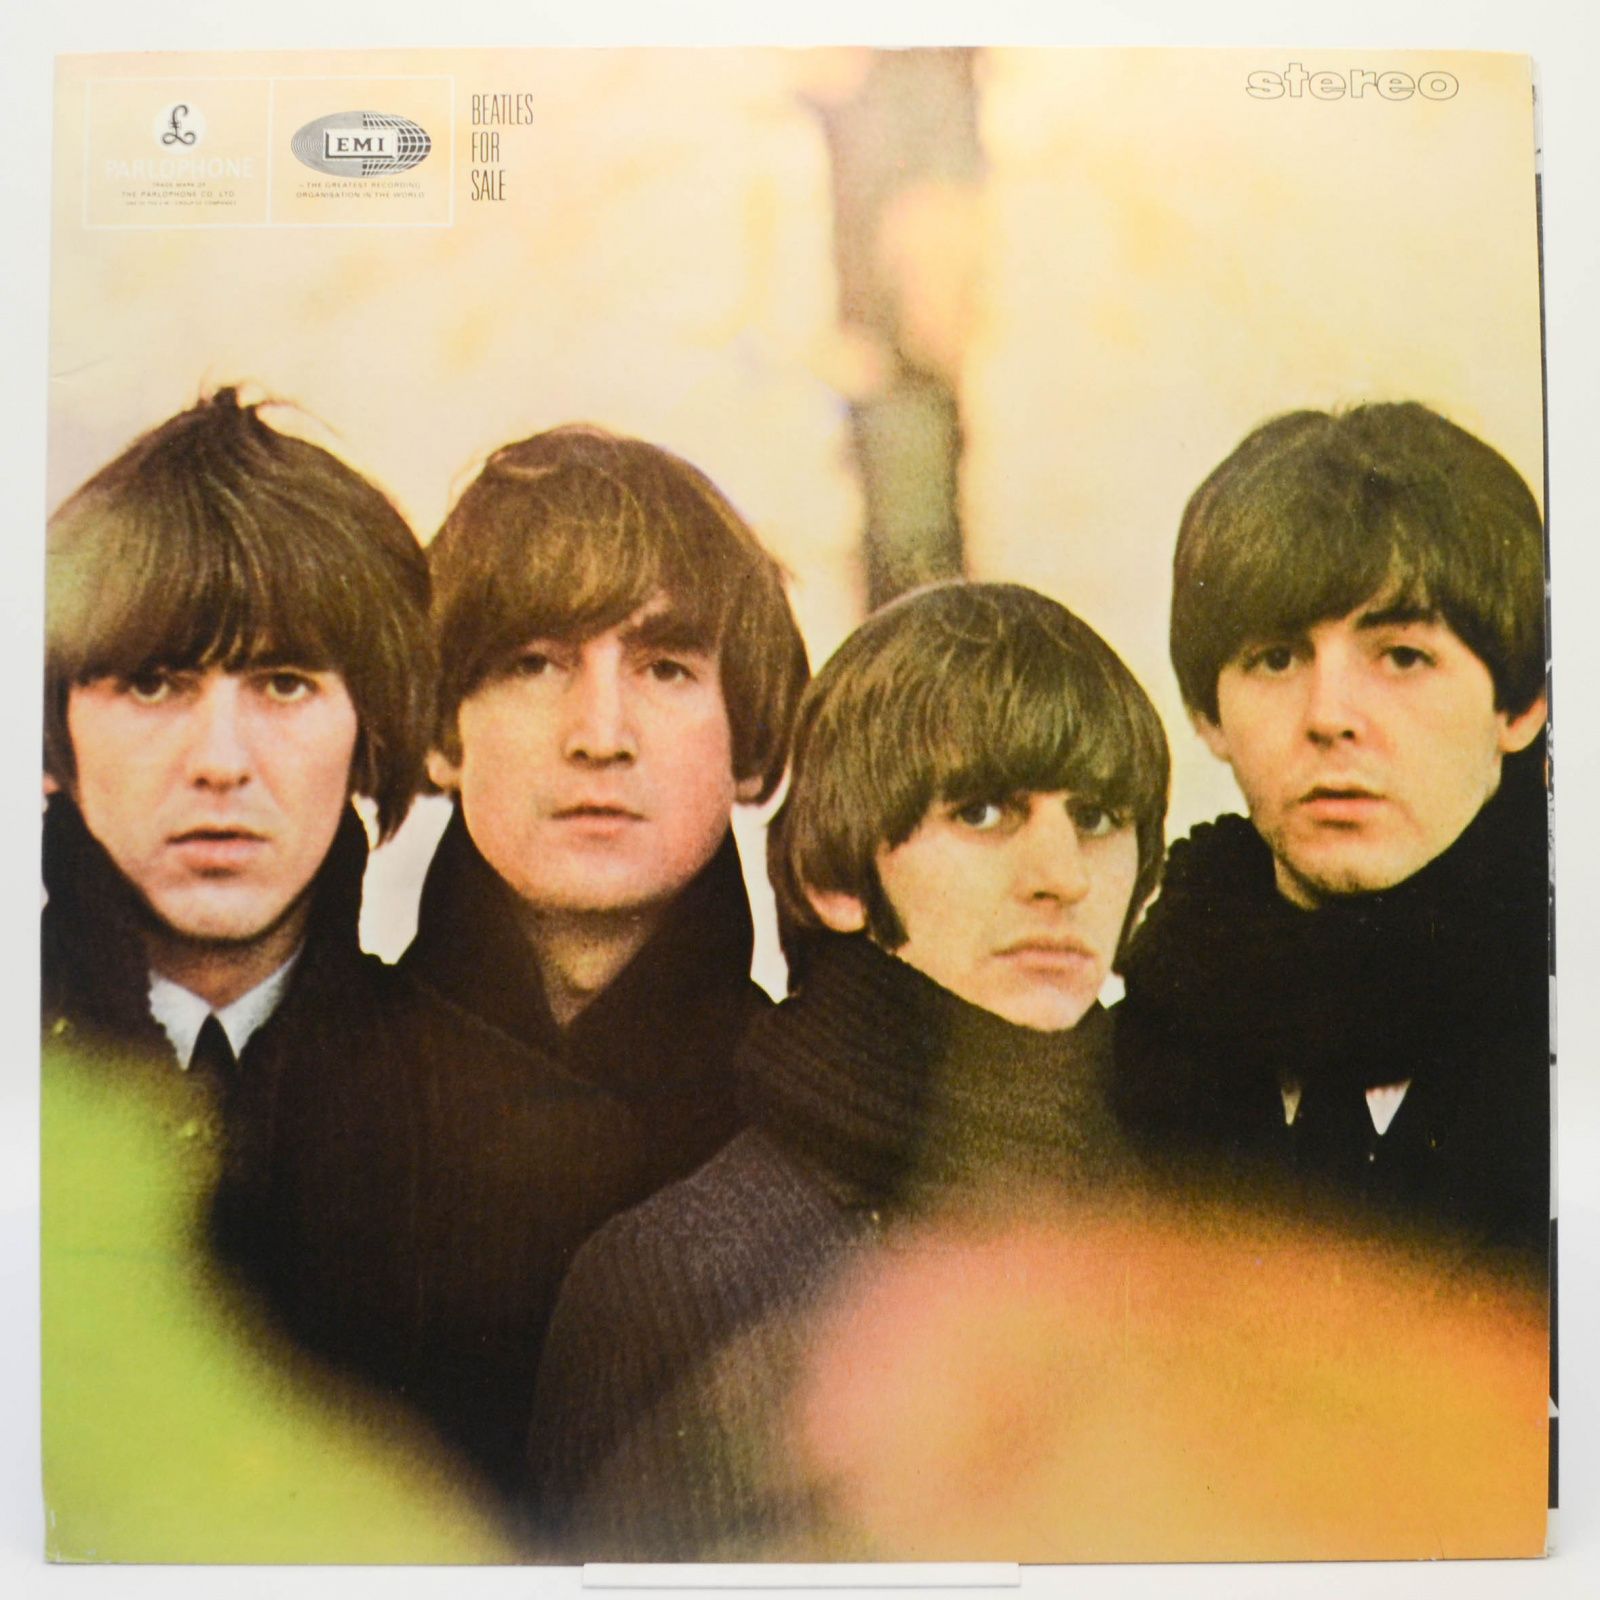 Beatles For Sale (UK), 1964